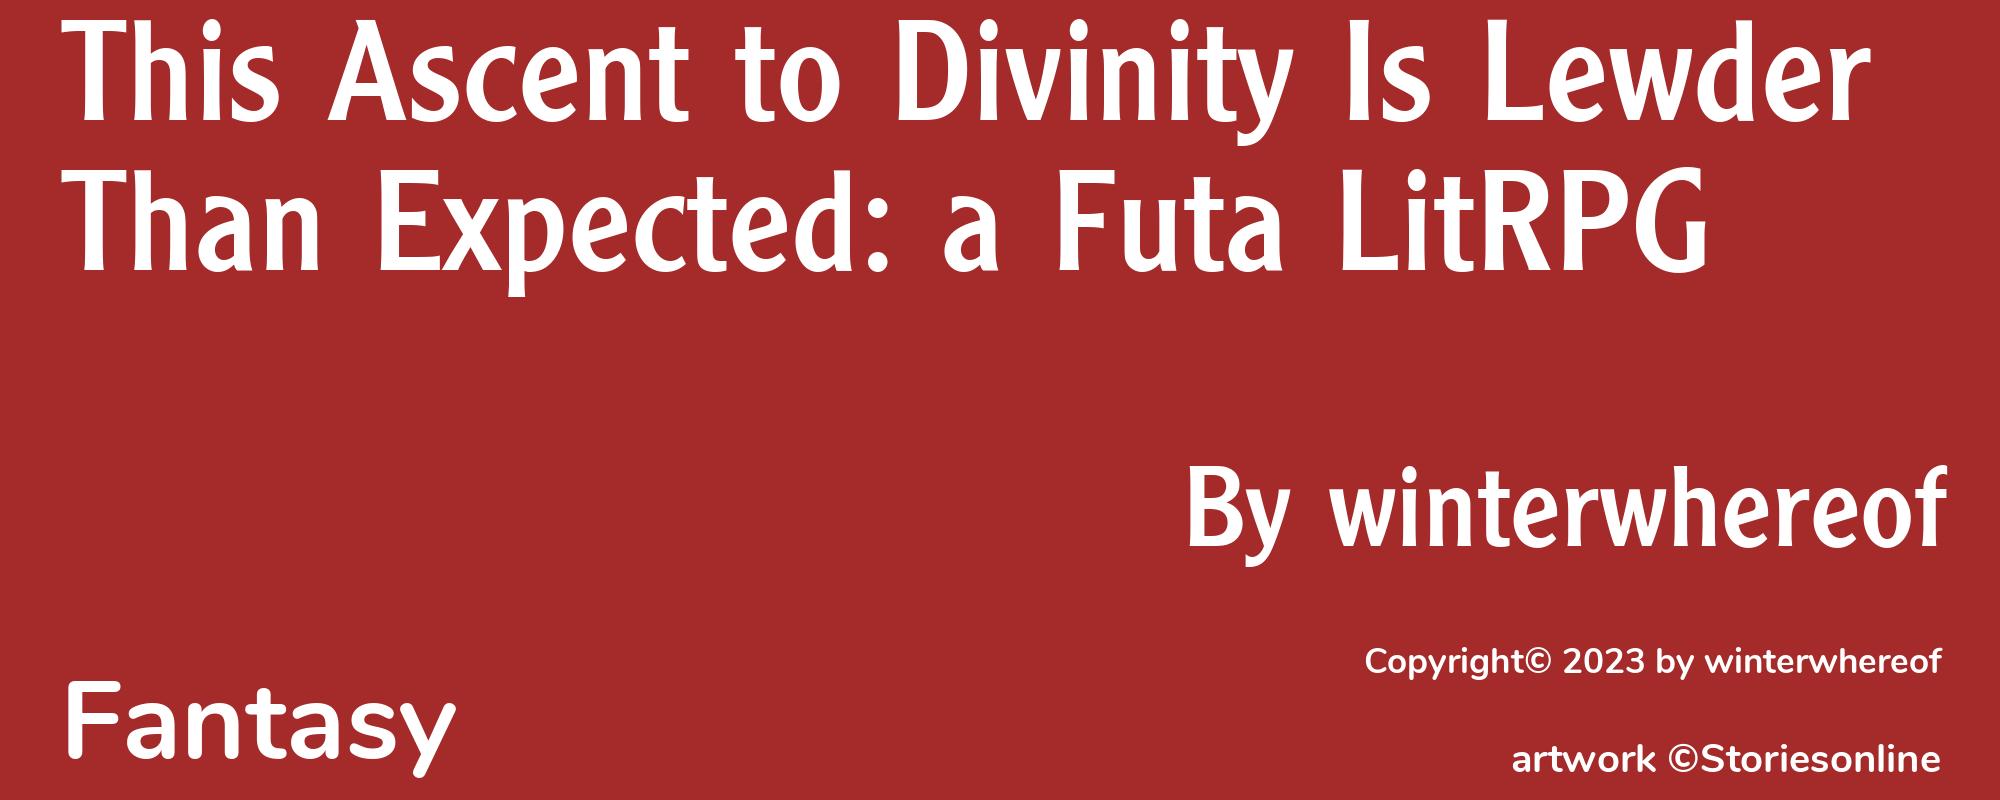 This Ascent to Divinity Is Lewder Than Expected: a Futa LitRPG - Cover